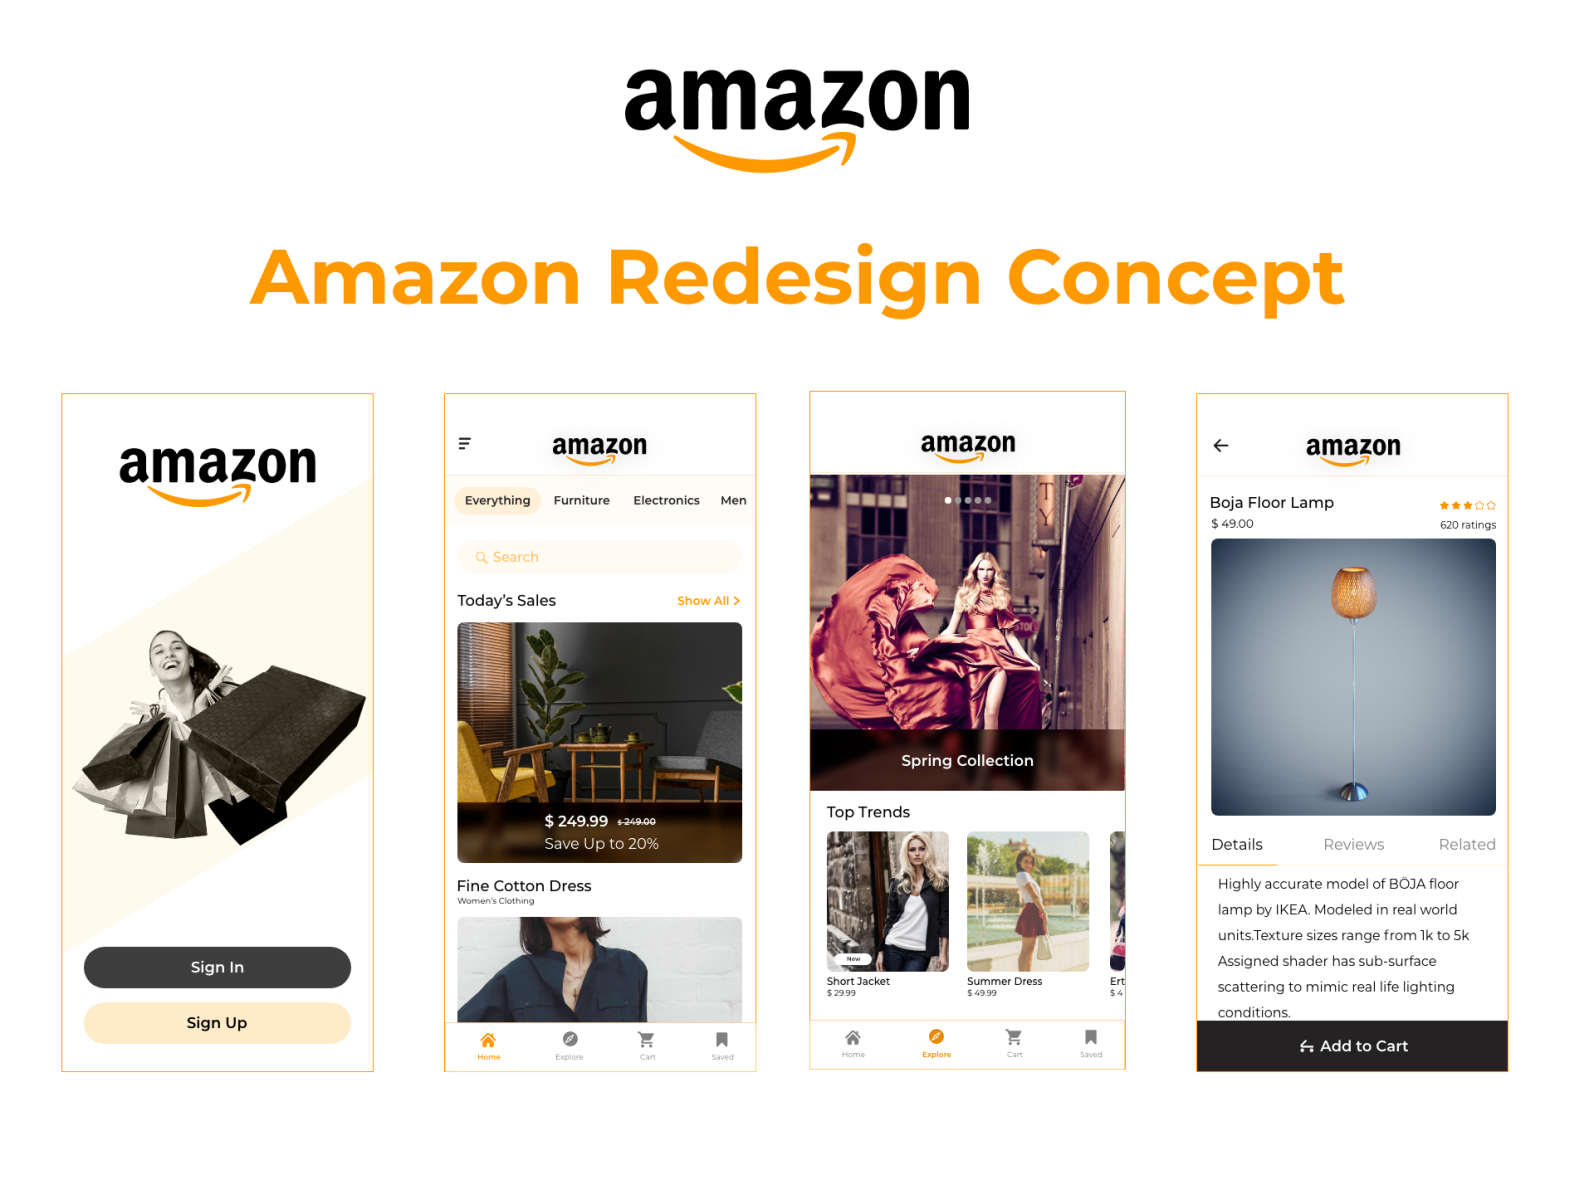 Amazon Redesign Concept by Ghasan abusal on Dribbble